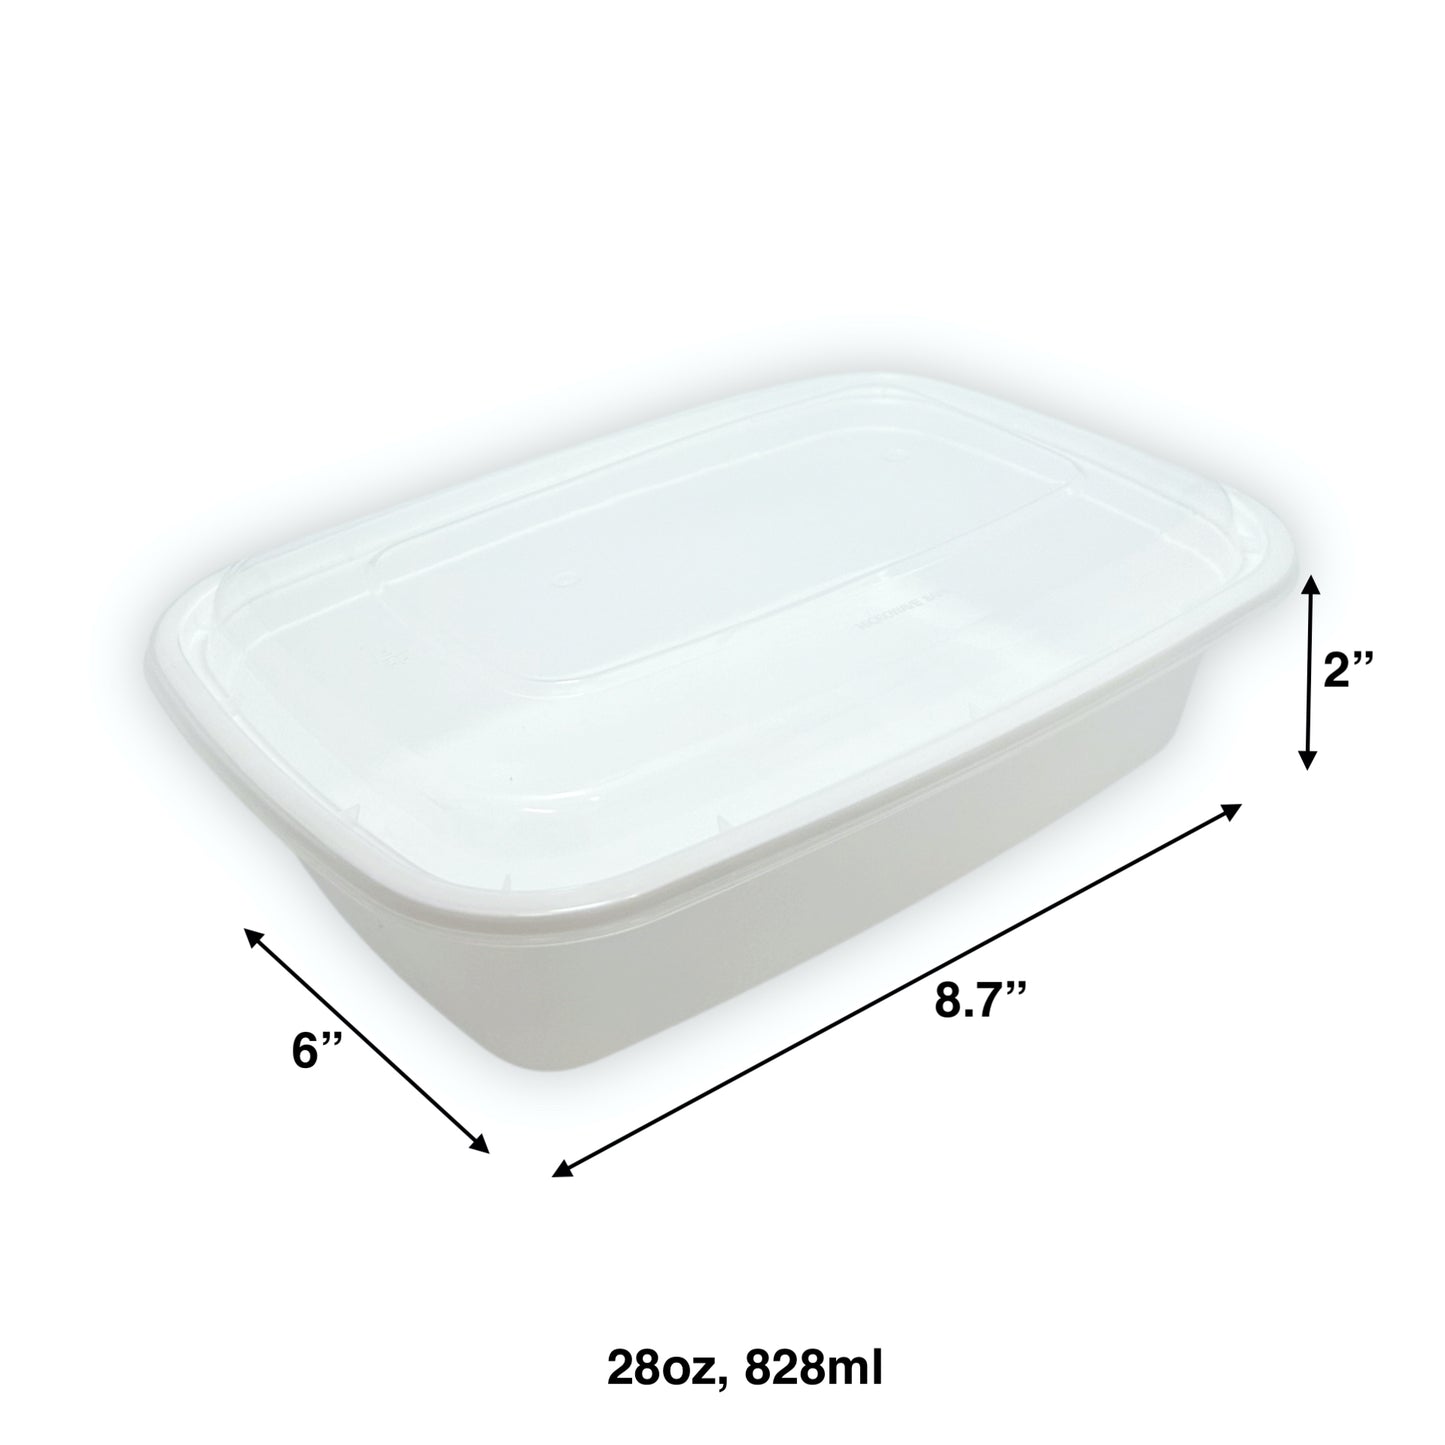 KIS-KY28G | 150sets 28oz, 828ml White PP Rectangle Container with Clear Lids Combo; $0.258/set